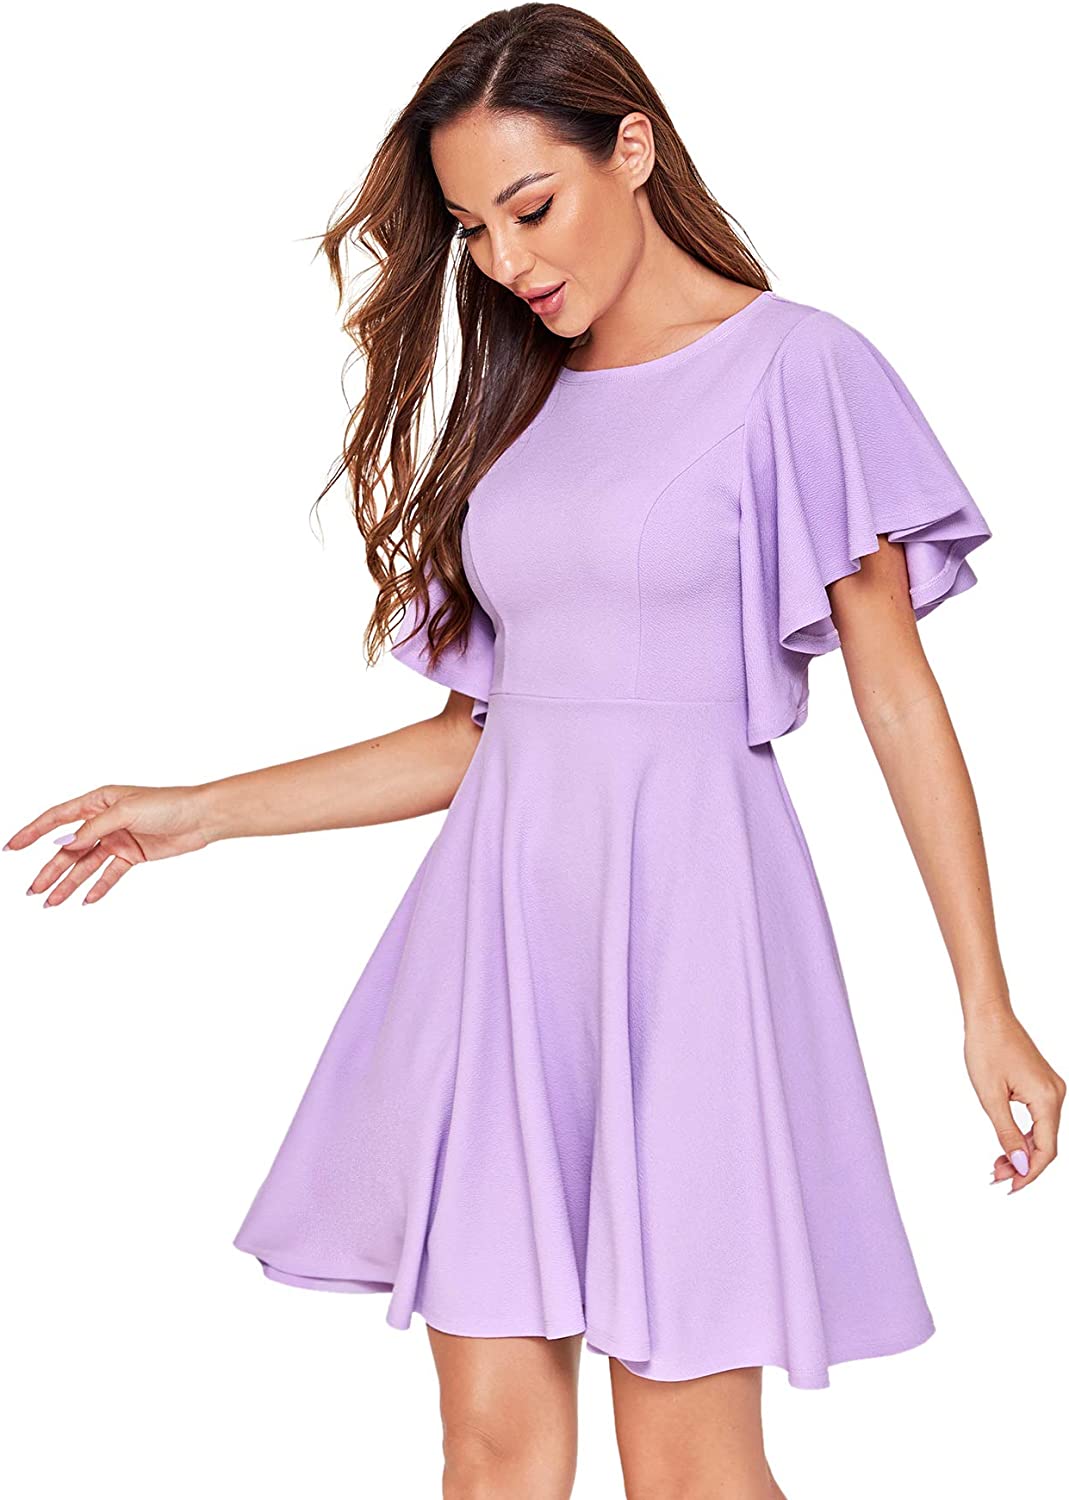 Purple and Easter dresses just go together perfectly. | The Dating Divas